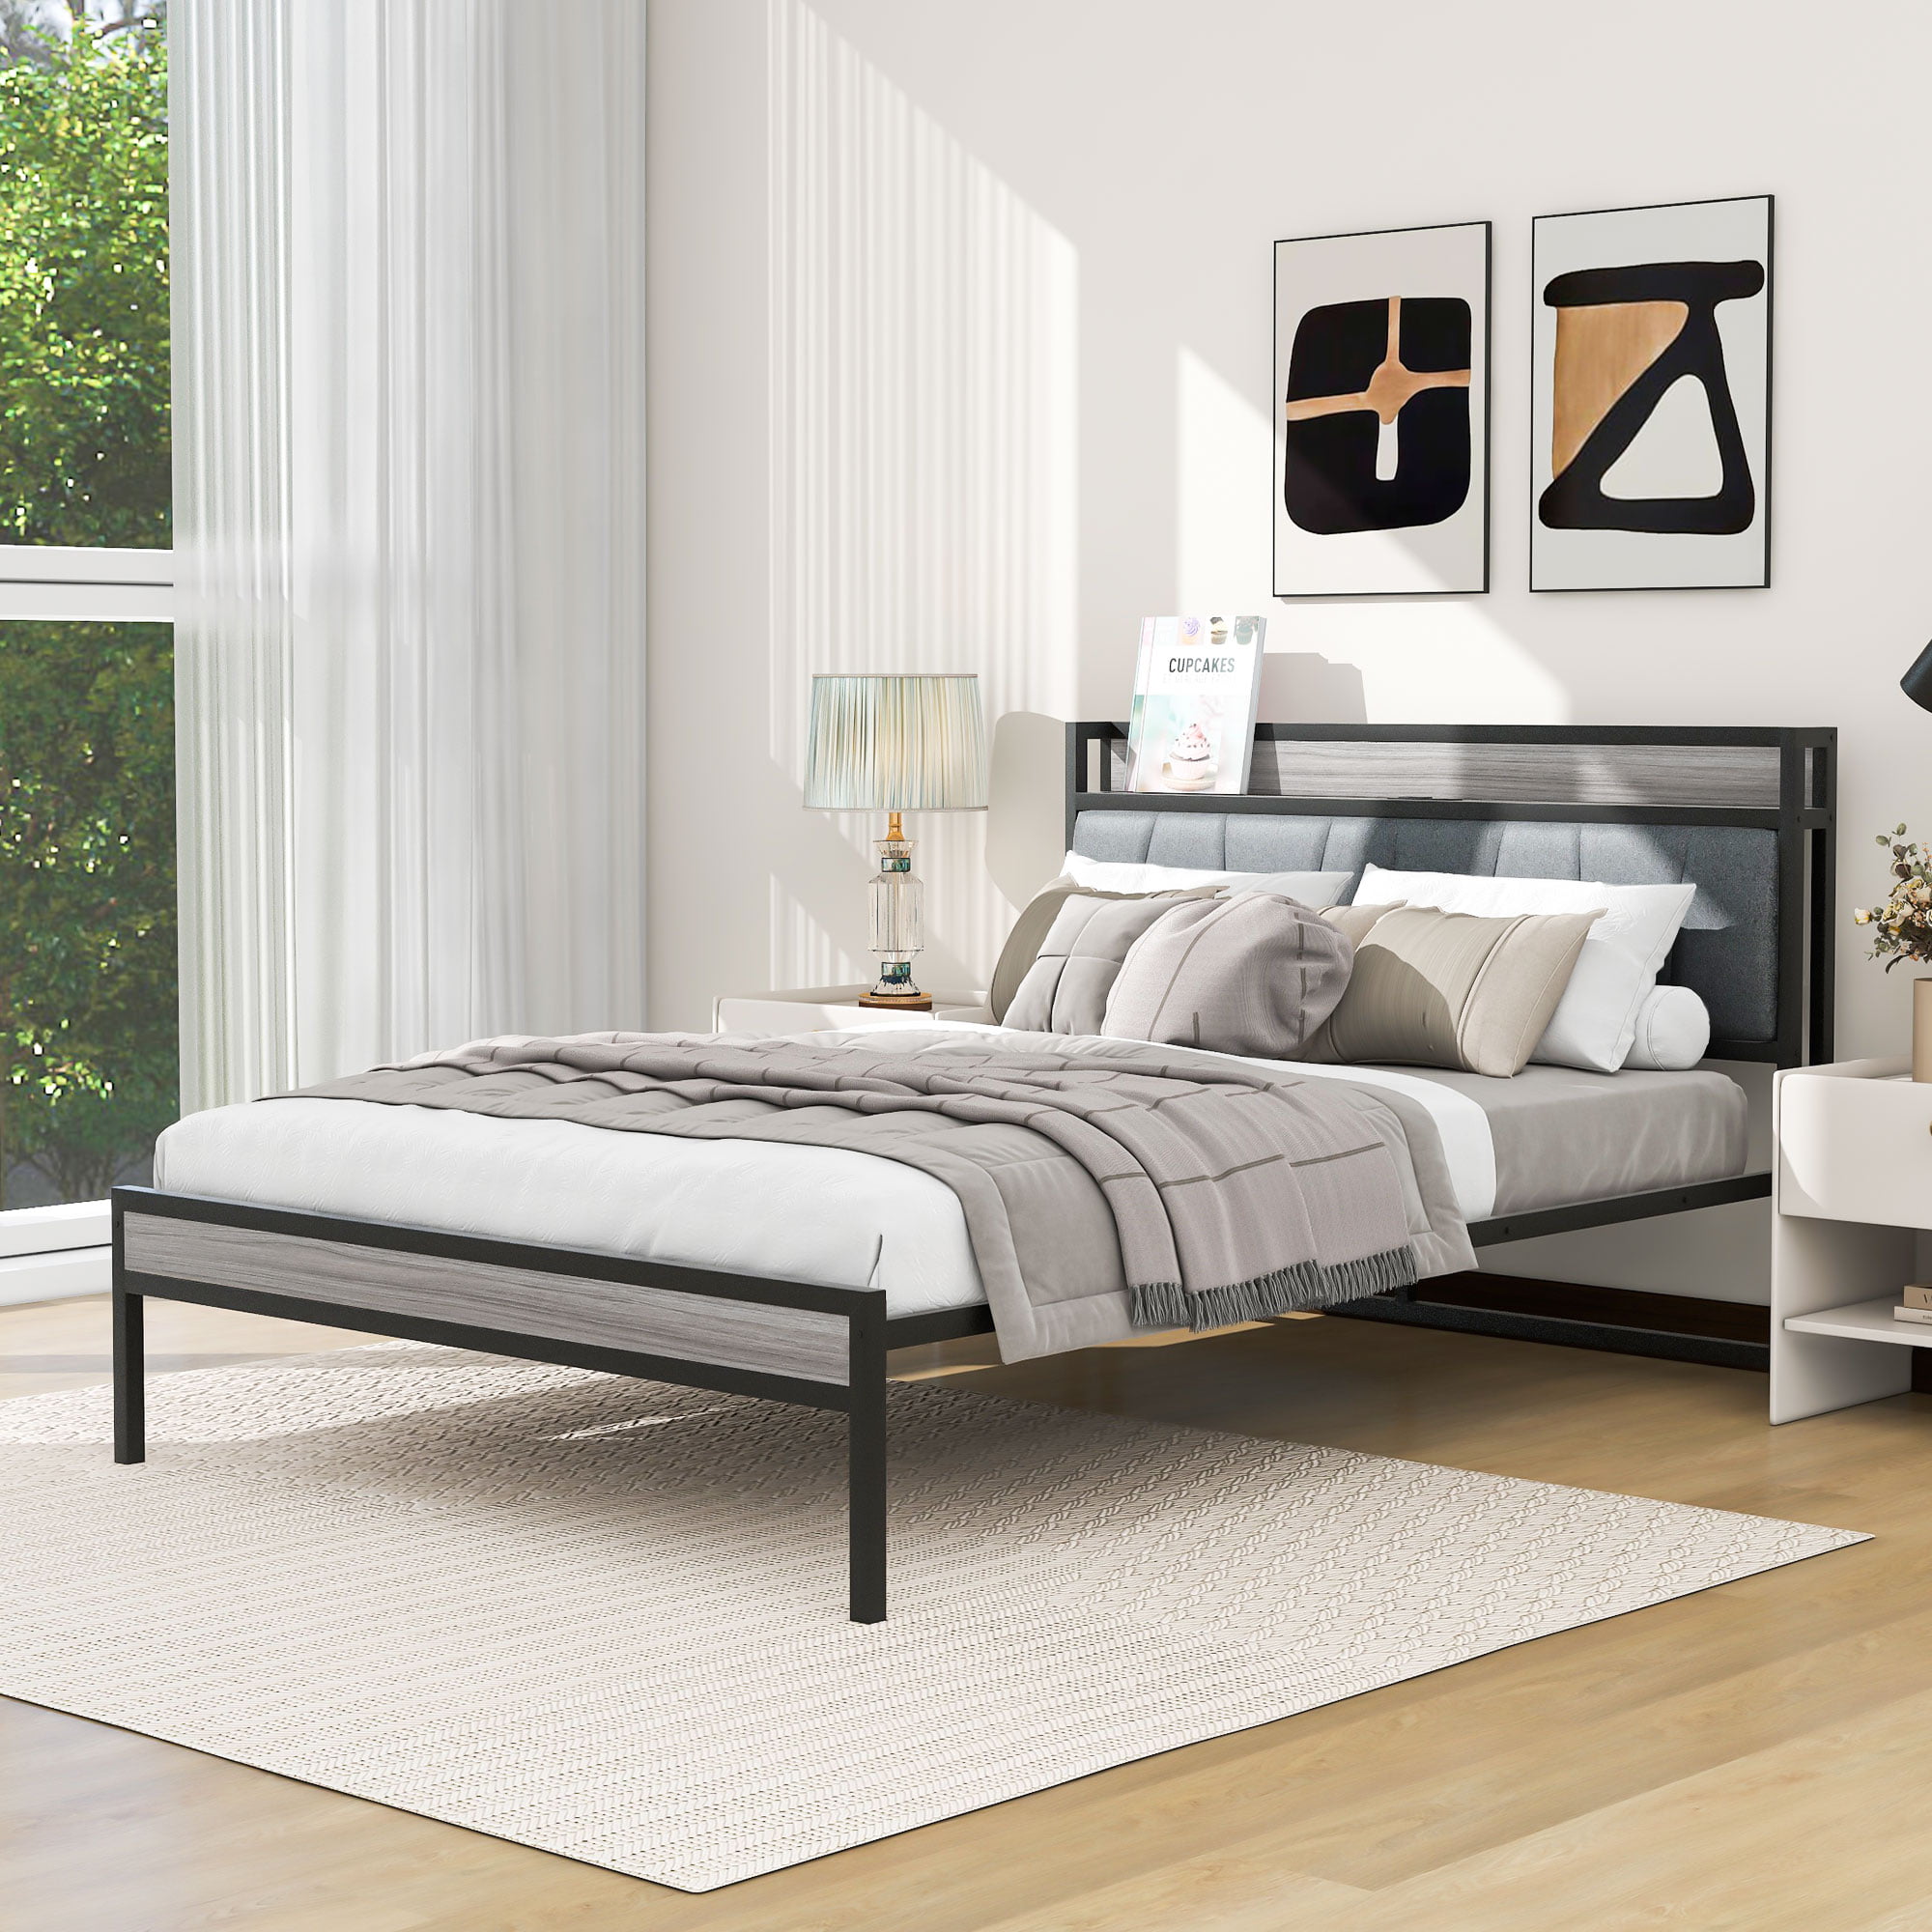 Full Size Metal Platform Bed With Upholstered Headboard Sockets, USB Ports And Slat Support